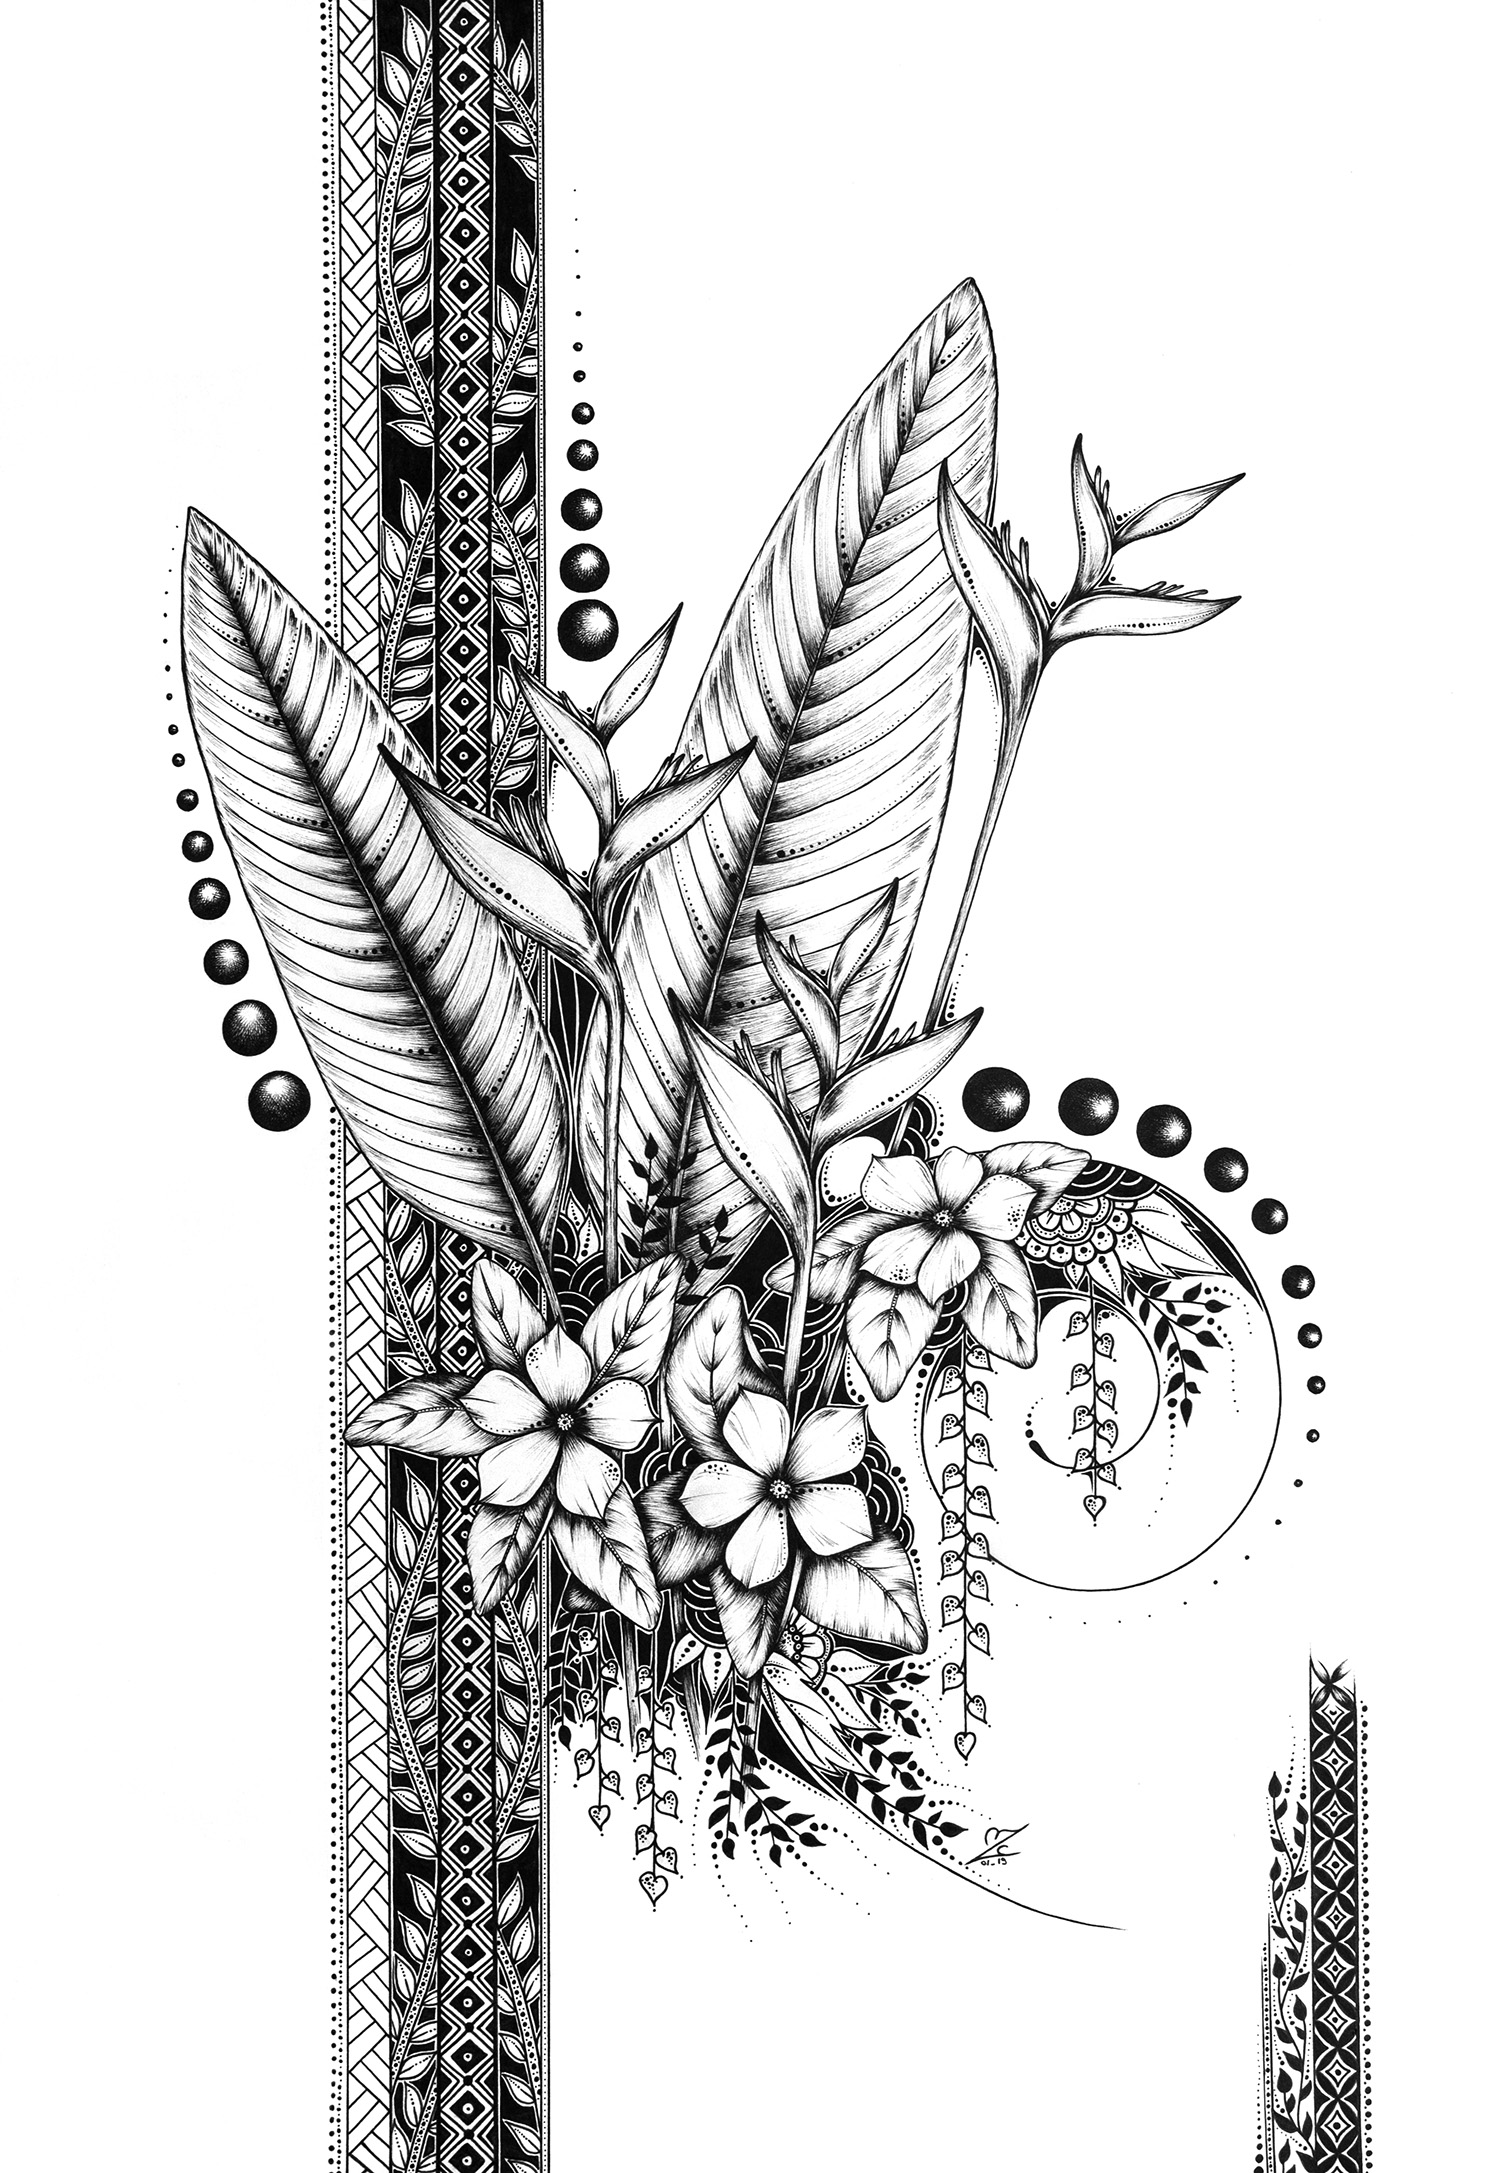 Heliconia & Perwinkles - Original Drawing 42cmx30xm - Sold